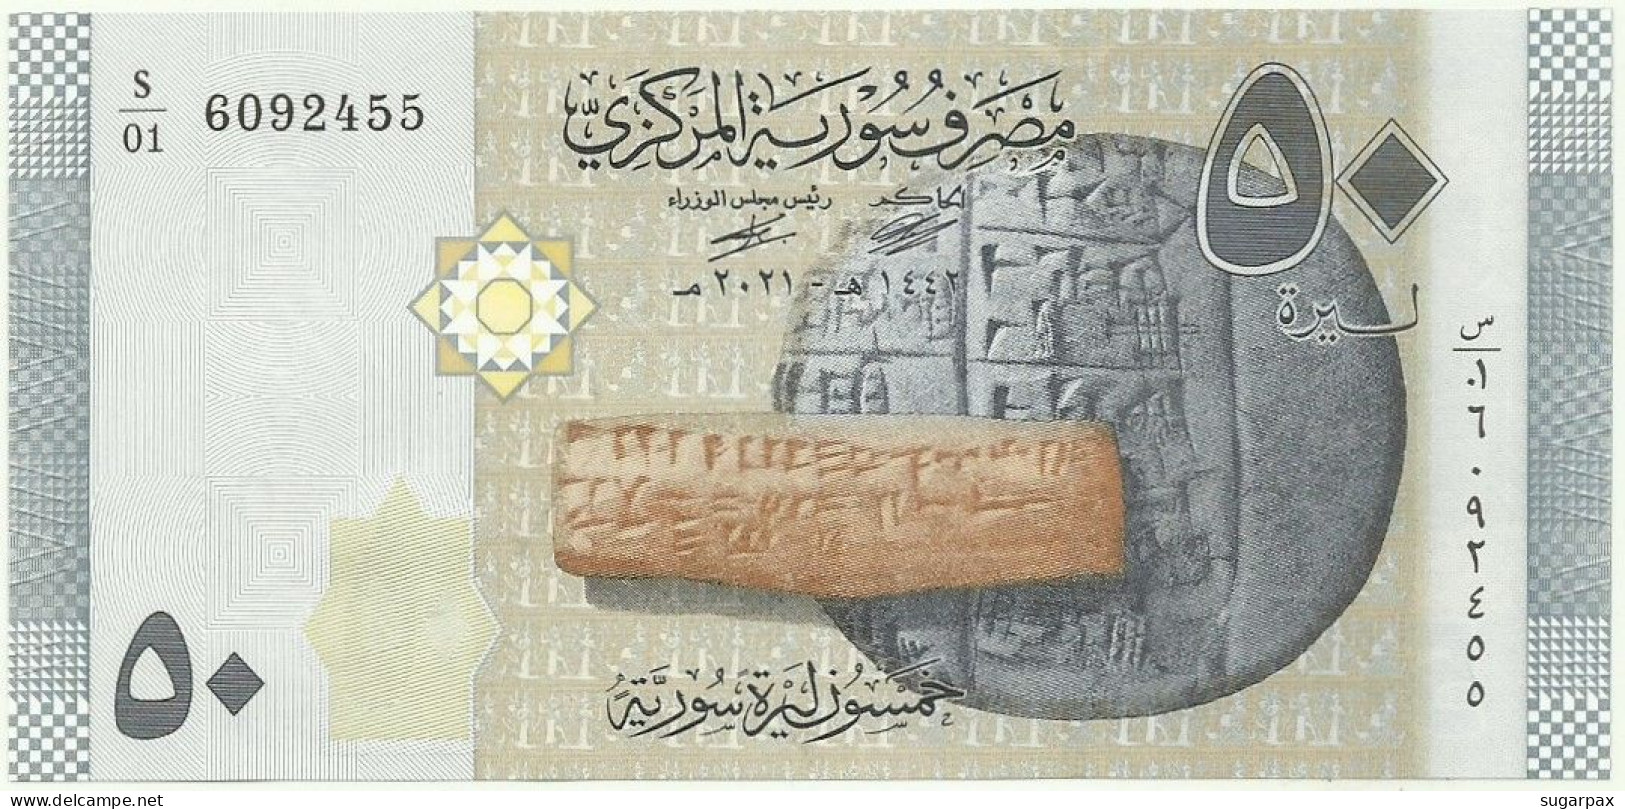 Syria - 50 Syrian Pounds - 2021 / AH 1442 - Pick 112.NEW - Unc. - Serie S/01 - Syrie